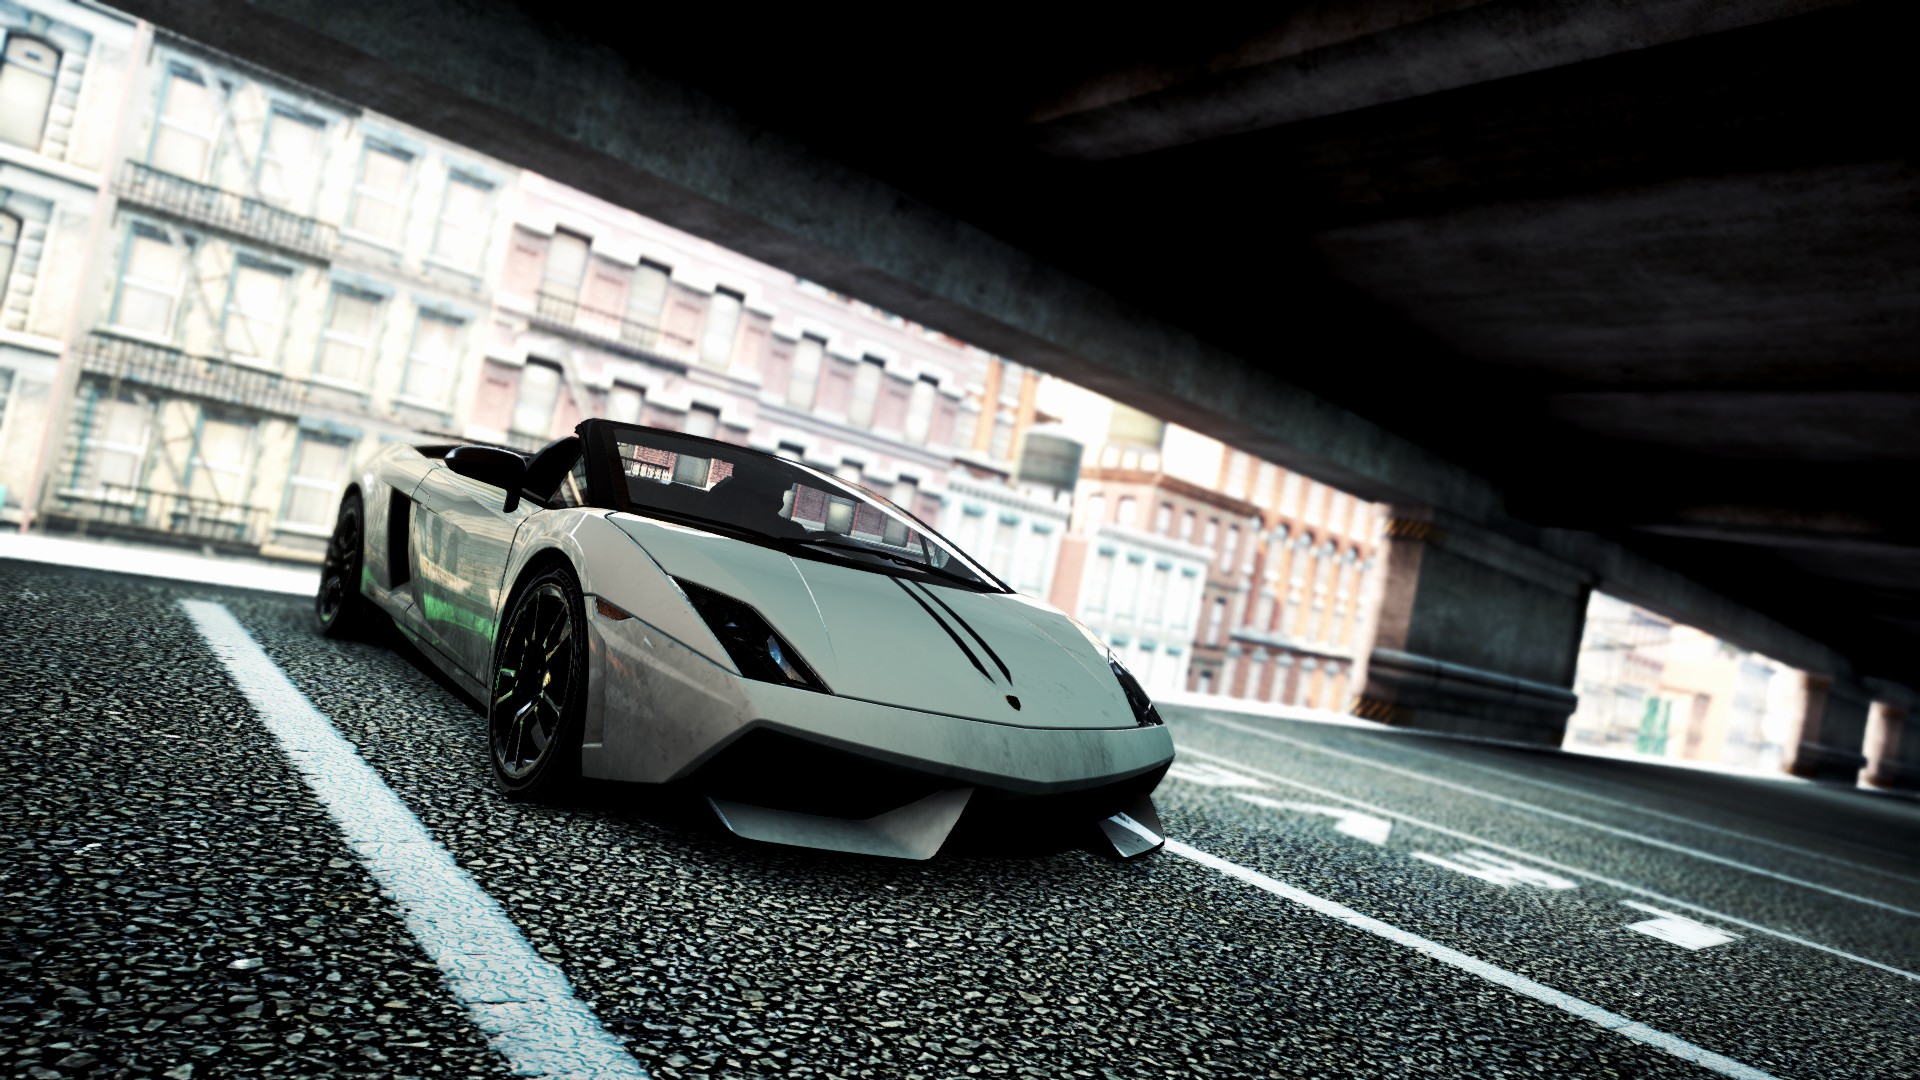 General 1920x1080 Need for Speed Need for Speed: Most Wanted Lamborghini Gallardo convertible italian cars Volkswagen Group car Electronic Arts vehicle video games frontal view Lamborghini parking lot video game art screen shot building CGI